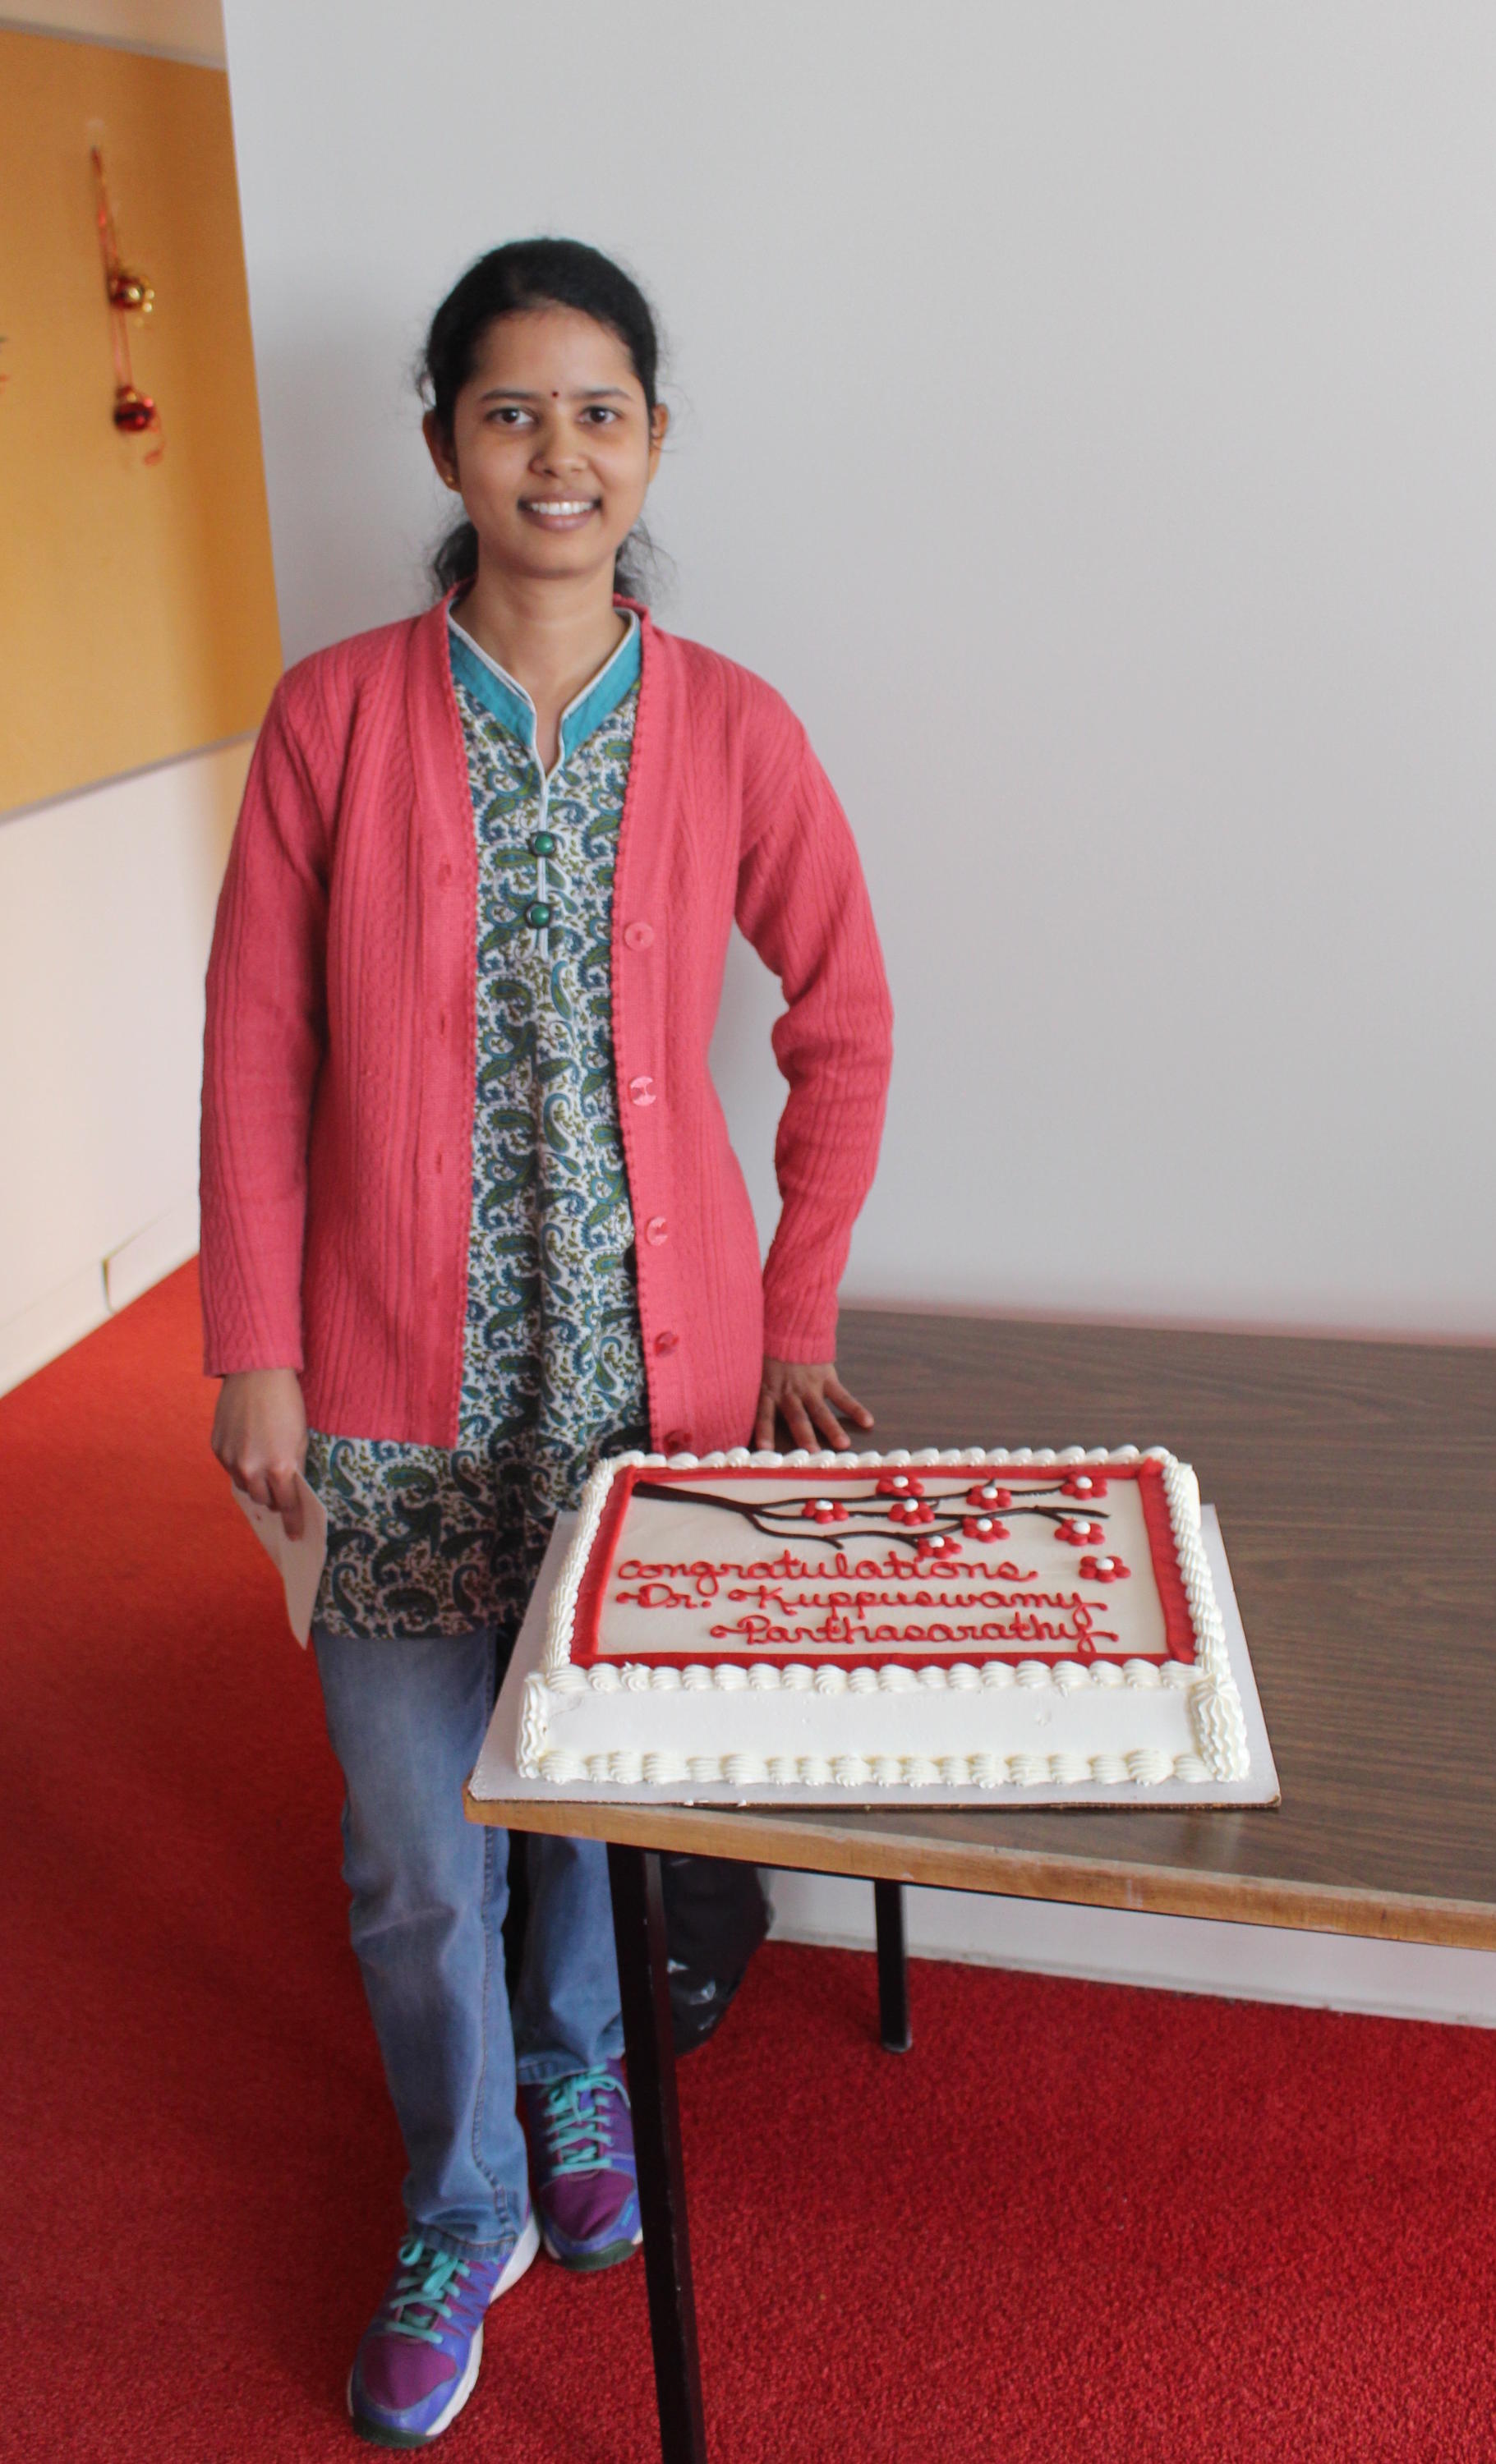 photo of Mohana with her cake